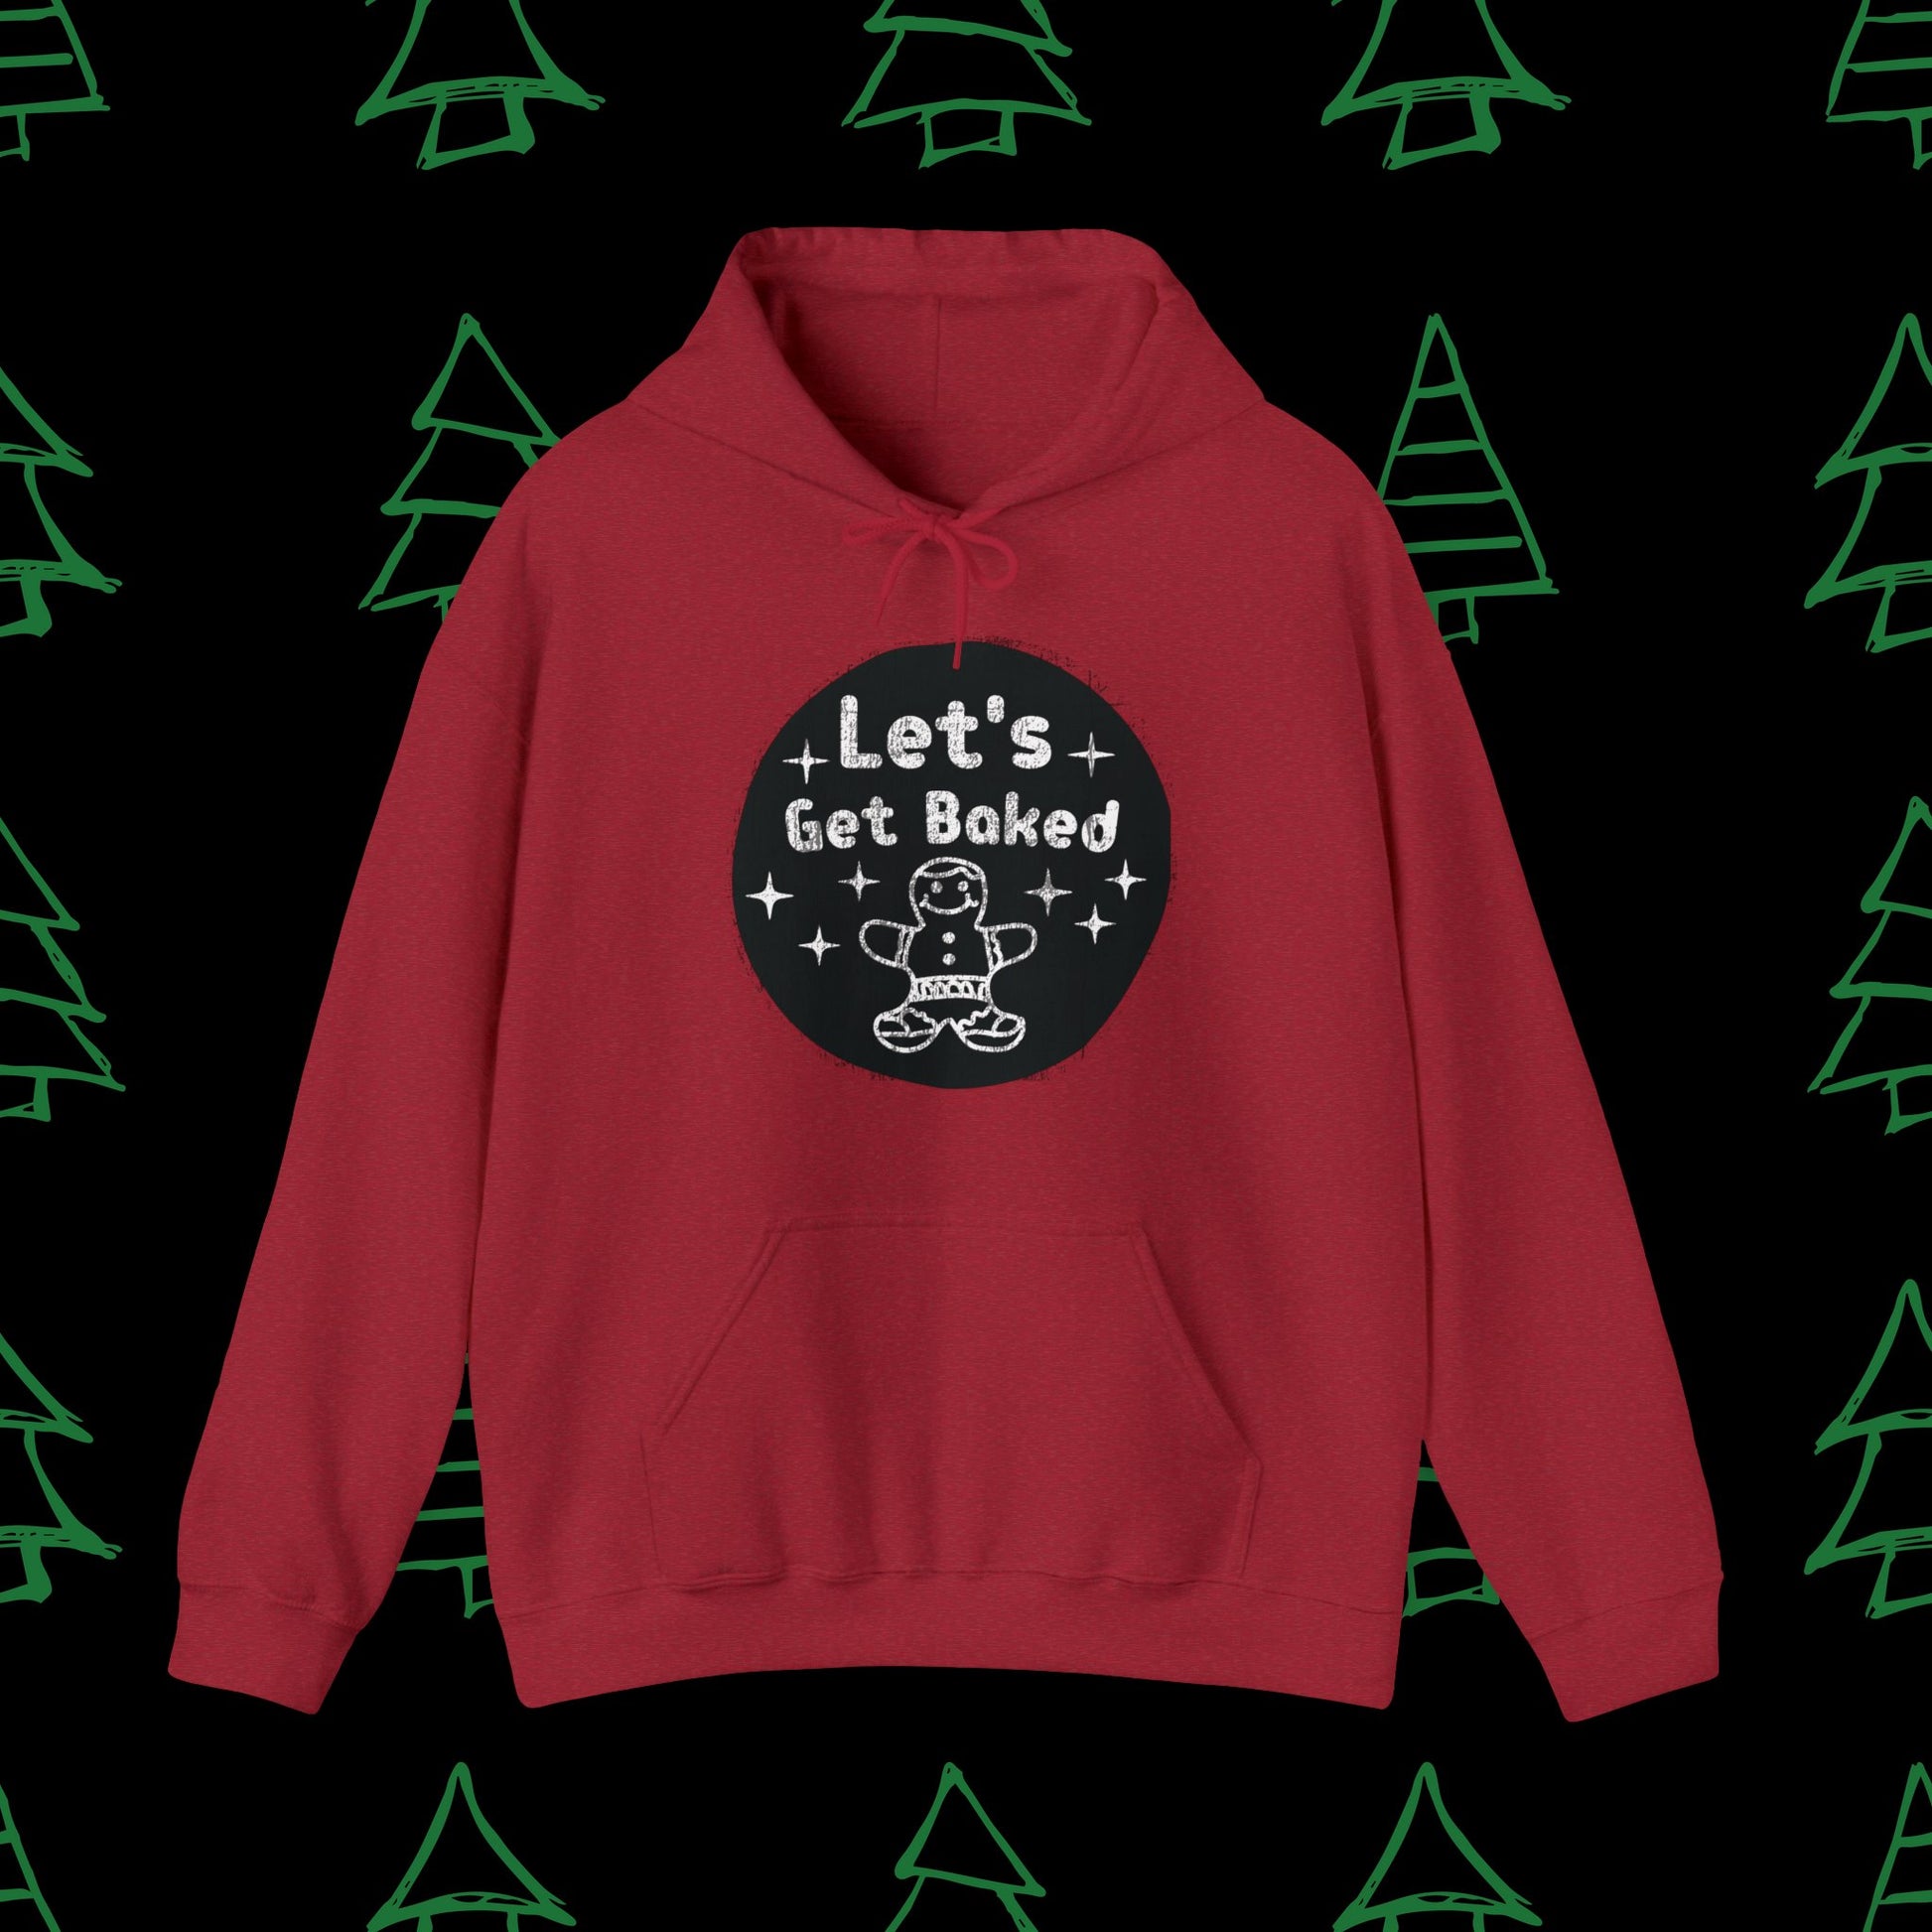 Christmas Hoodie - Let's Get Baked - Mens Christmas Shirts - Adult Christmas Hooded Sweatshirt Hooded Sweatshirt Graphic Avenue Antique Cherry Red Adult Small 